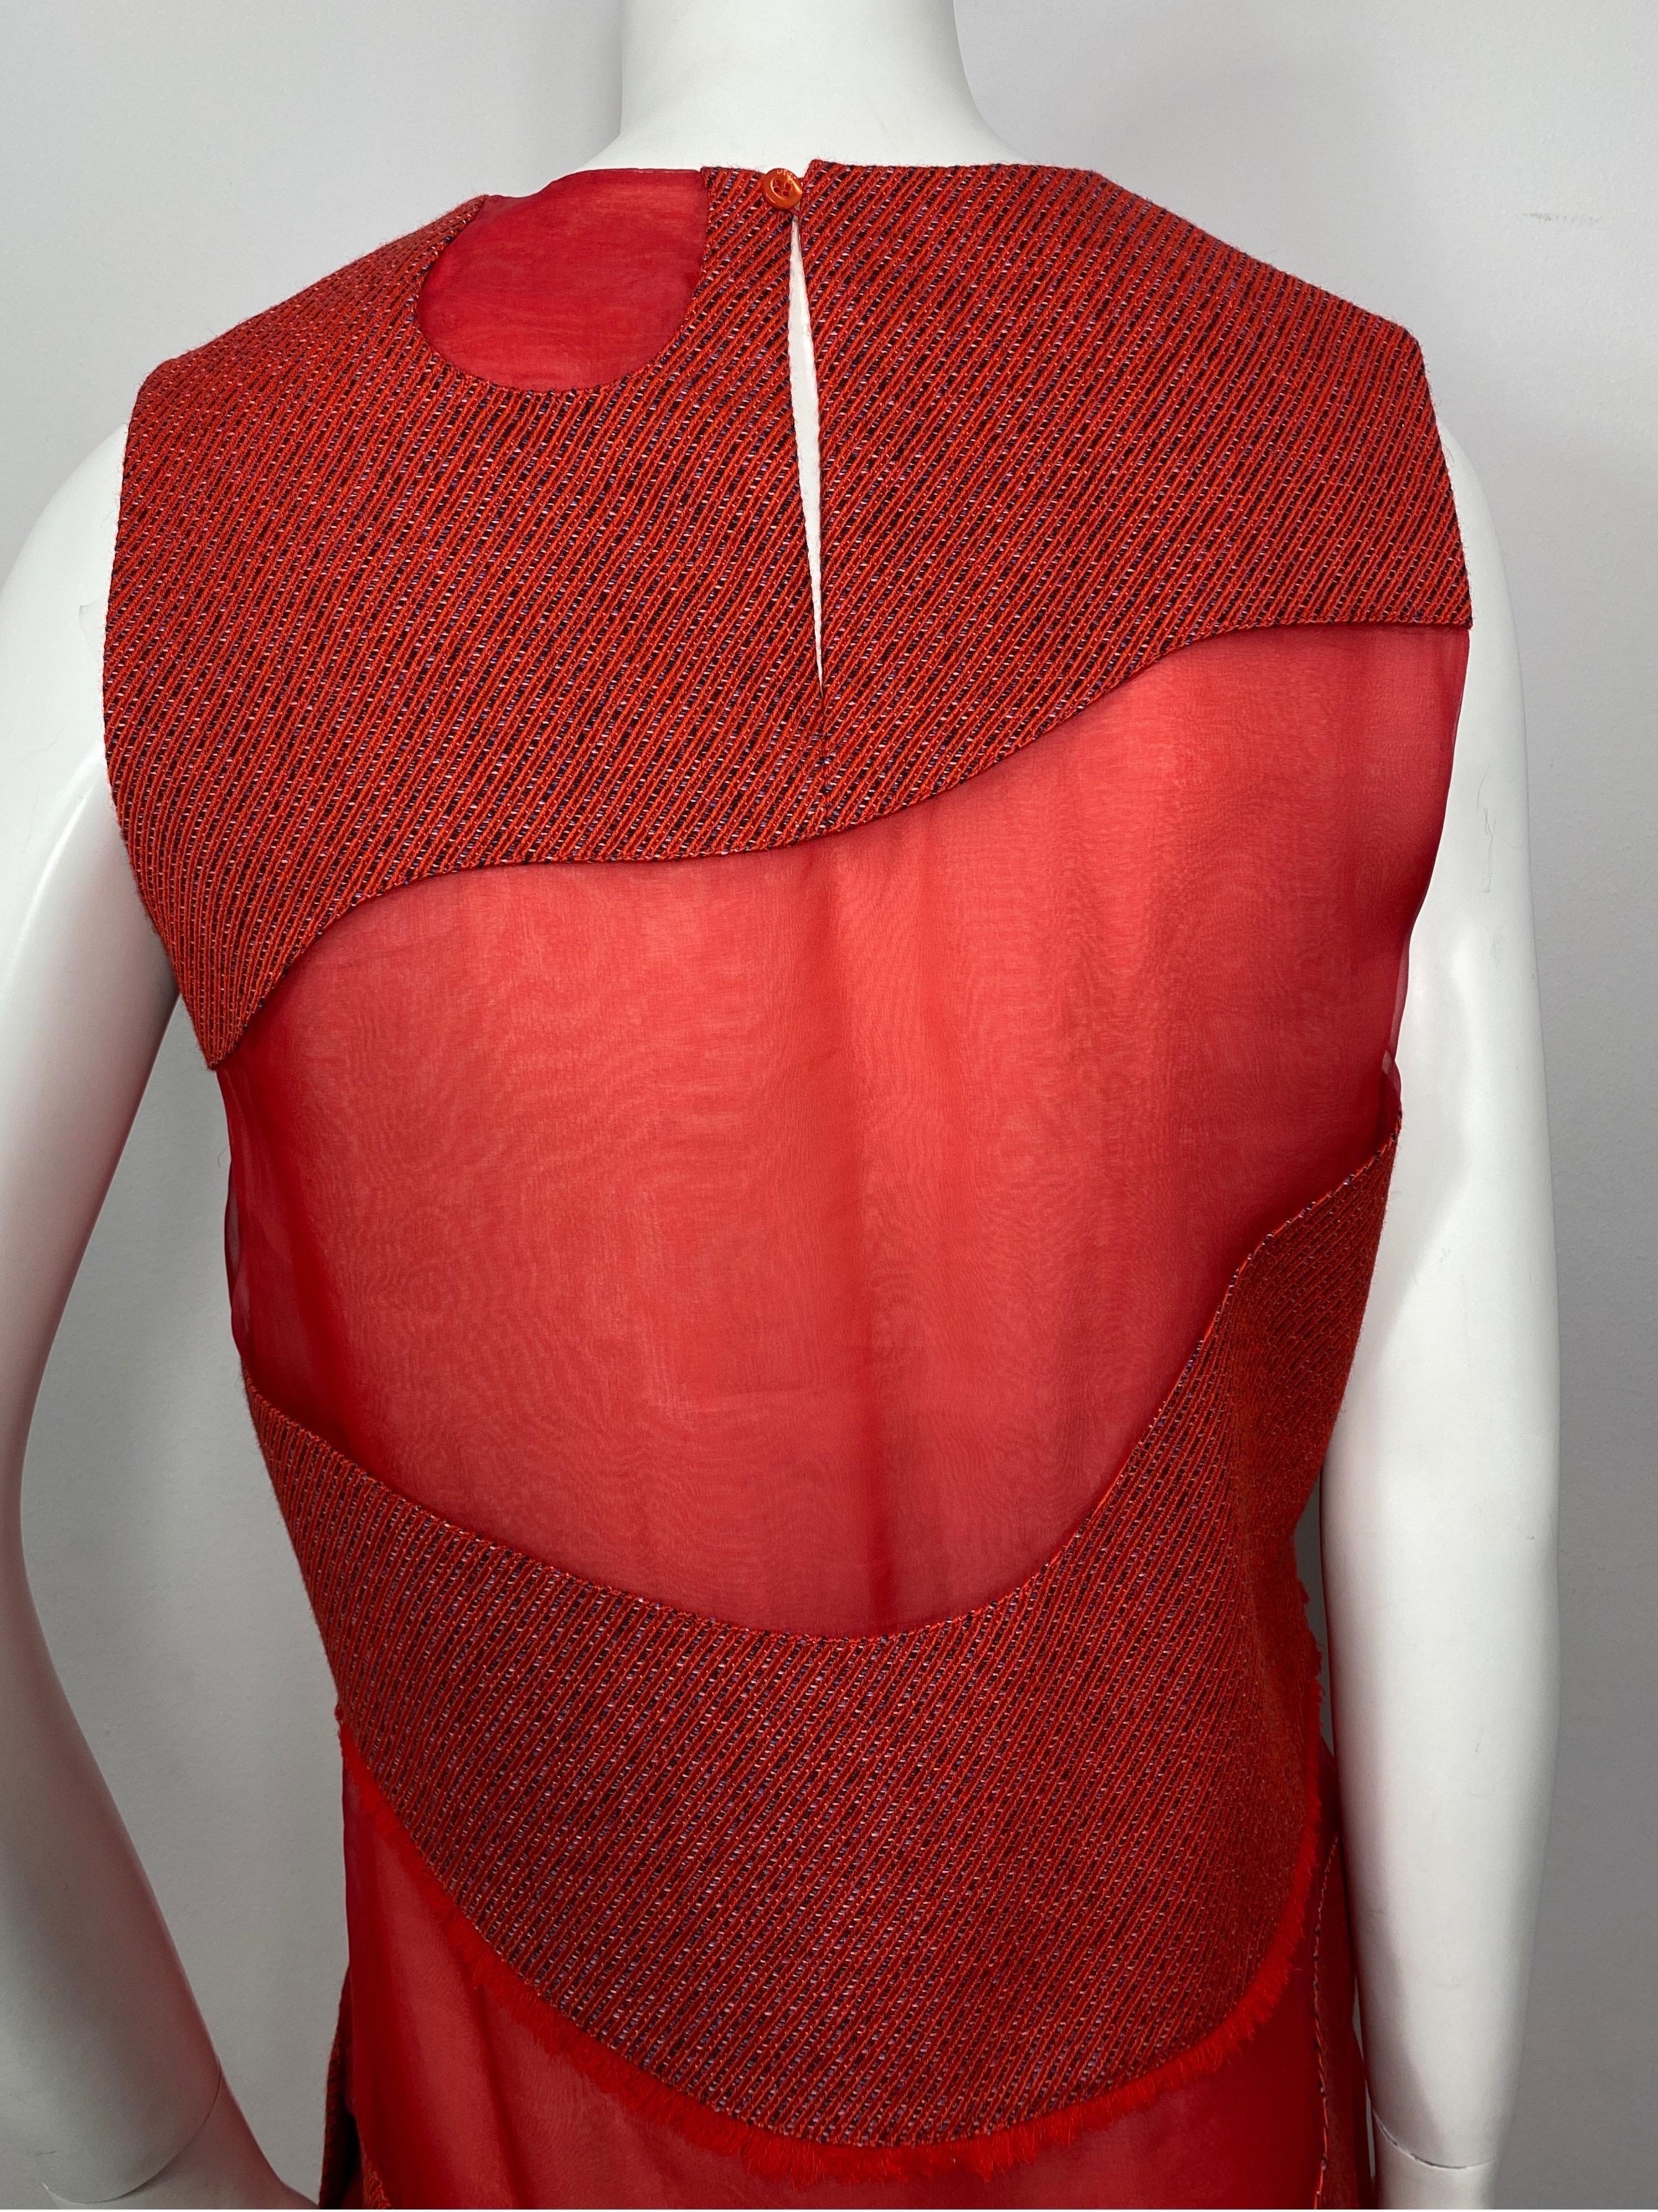 Christian Dior Runway Fall 2015 Red Multi Layer Silk Shift Dress - US Size 8 For Sale 5